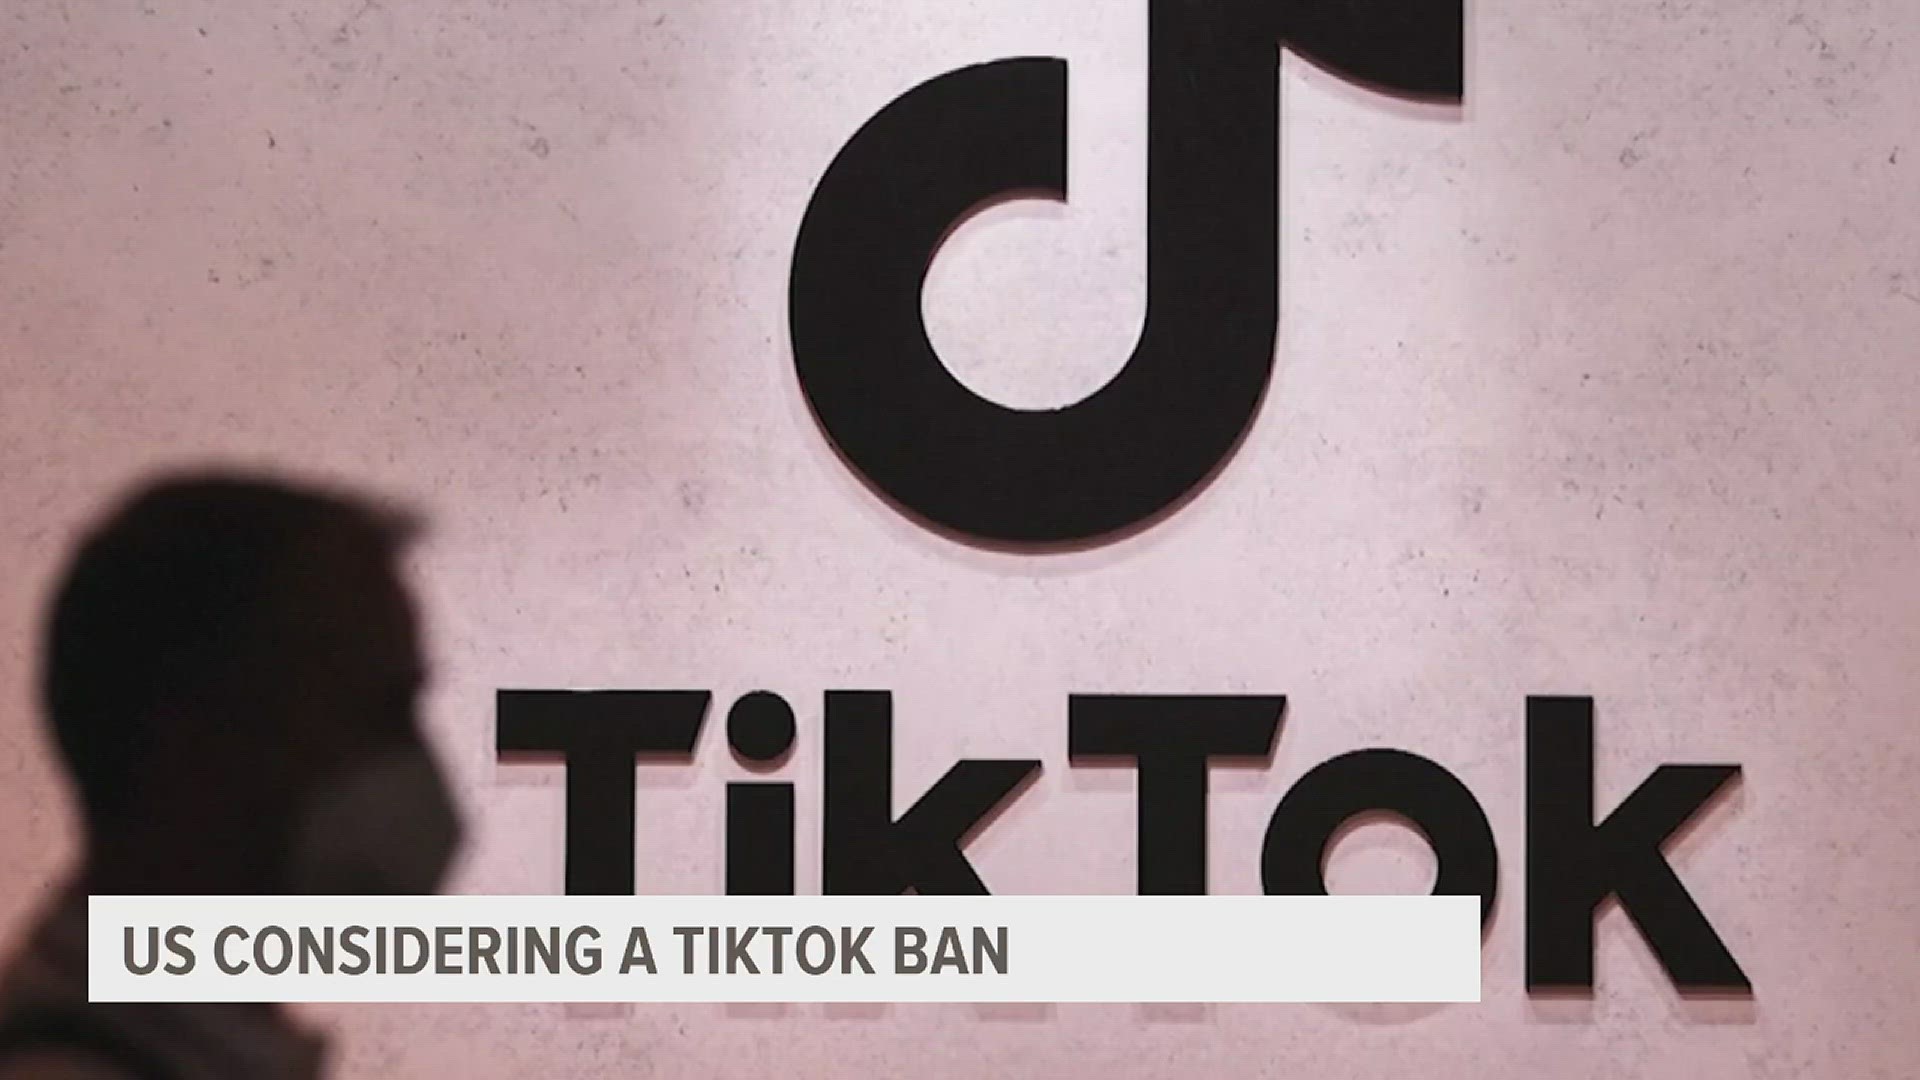 Lawmakers in both the House and Senate have been moving forward with legislation that would give the Biden administration more power to clamp down on TikTok.